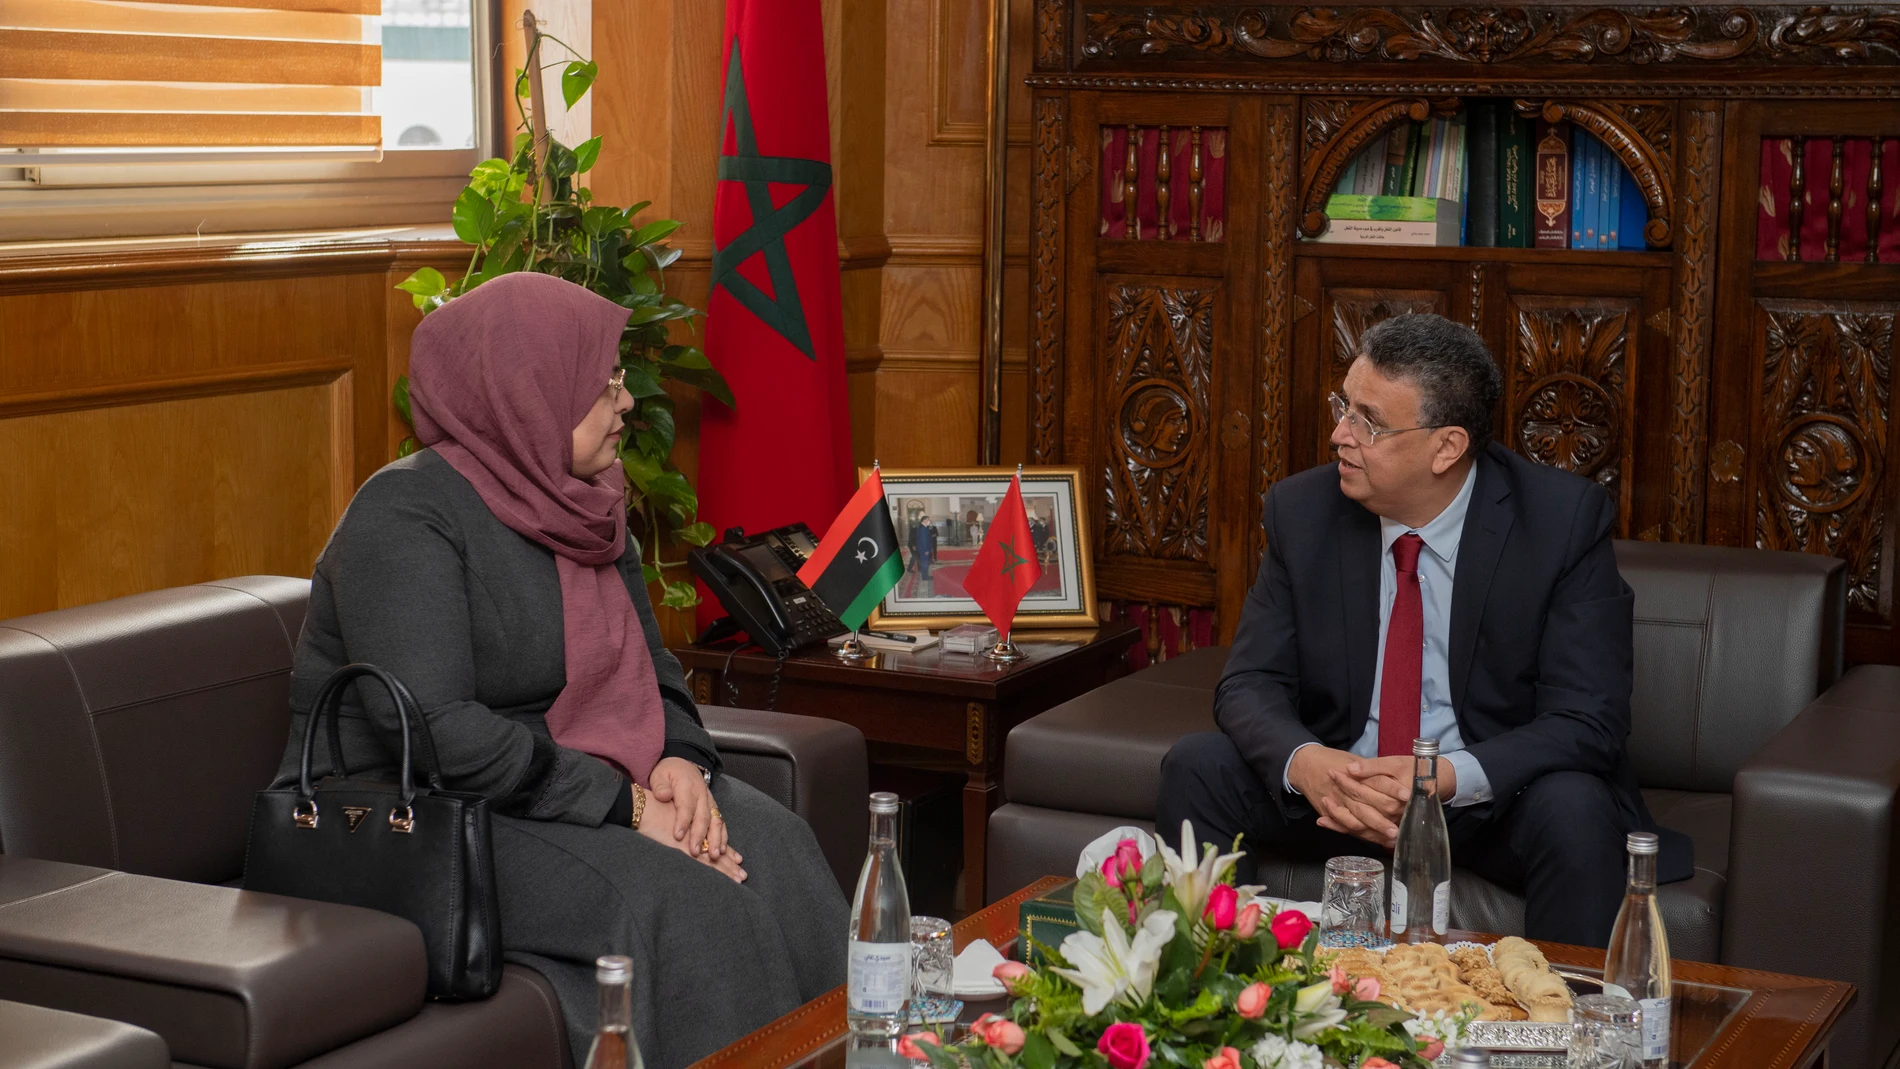 Rabat (Morocco), 13/02/2023.- Abdellatif Wahbi (R), Morocco's Minister of Justice, and his counterpart from Libya, Halima Abdel Rahman (L), hold a meeting in Rabat Morocco, 13 February 2023. Abdel Rahman is on a working visit to Morocco. (Libia, Marruecos) EFE/EPA/JALAL MORCHIDI 